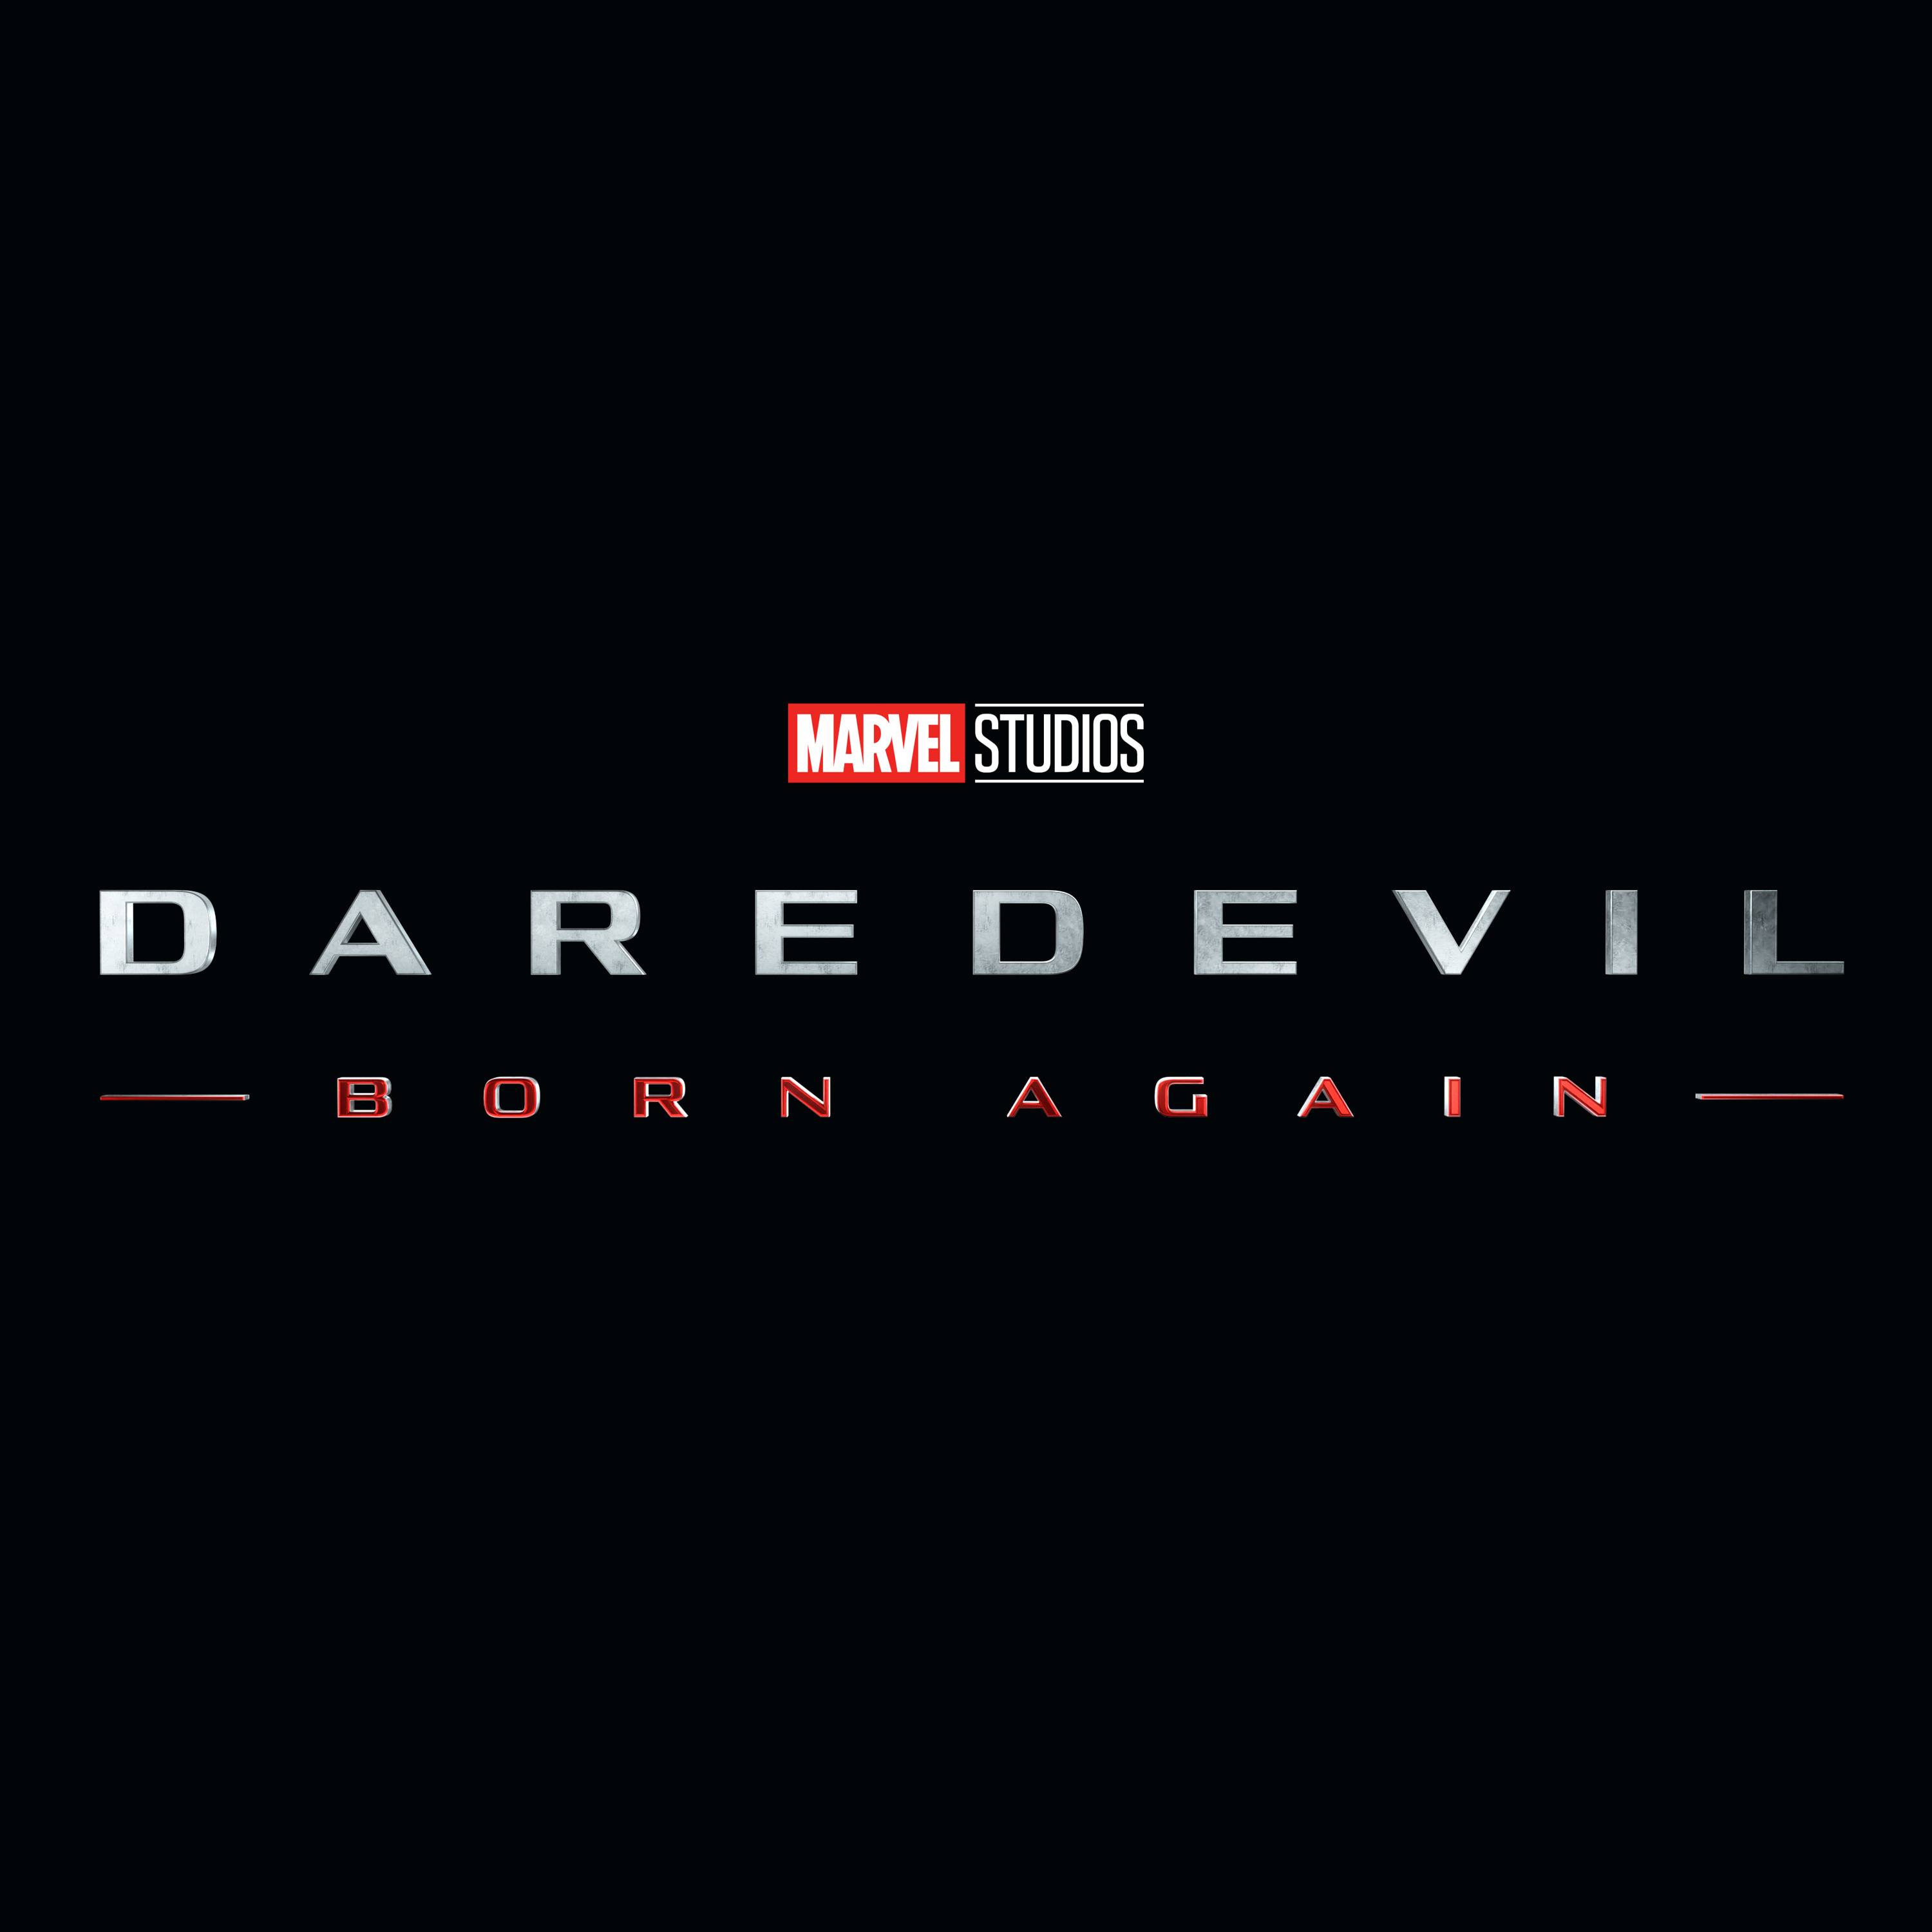 Title image of the 'Daredevil' series